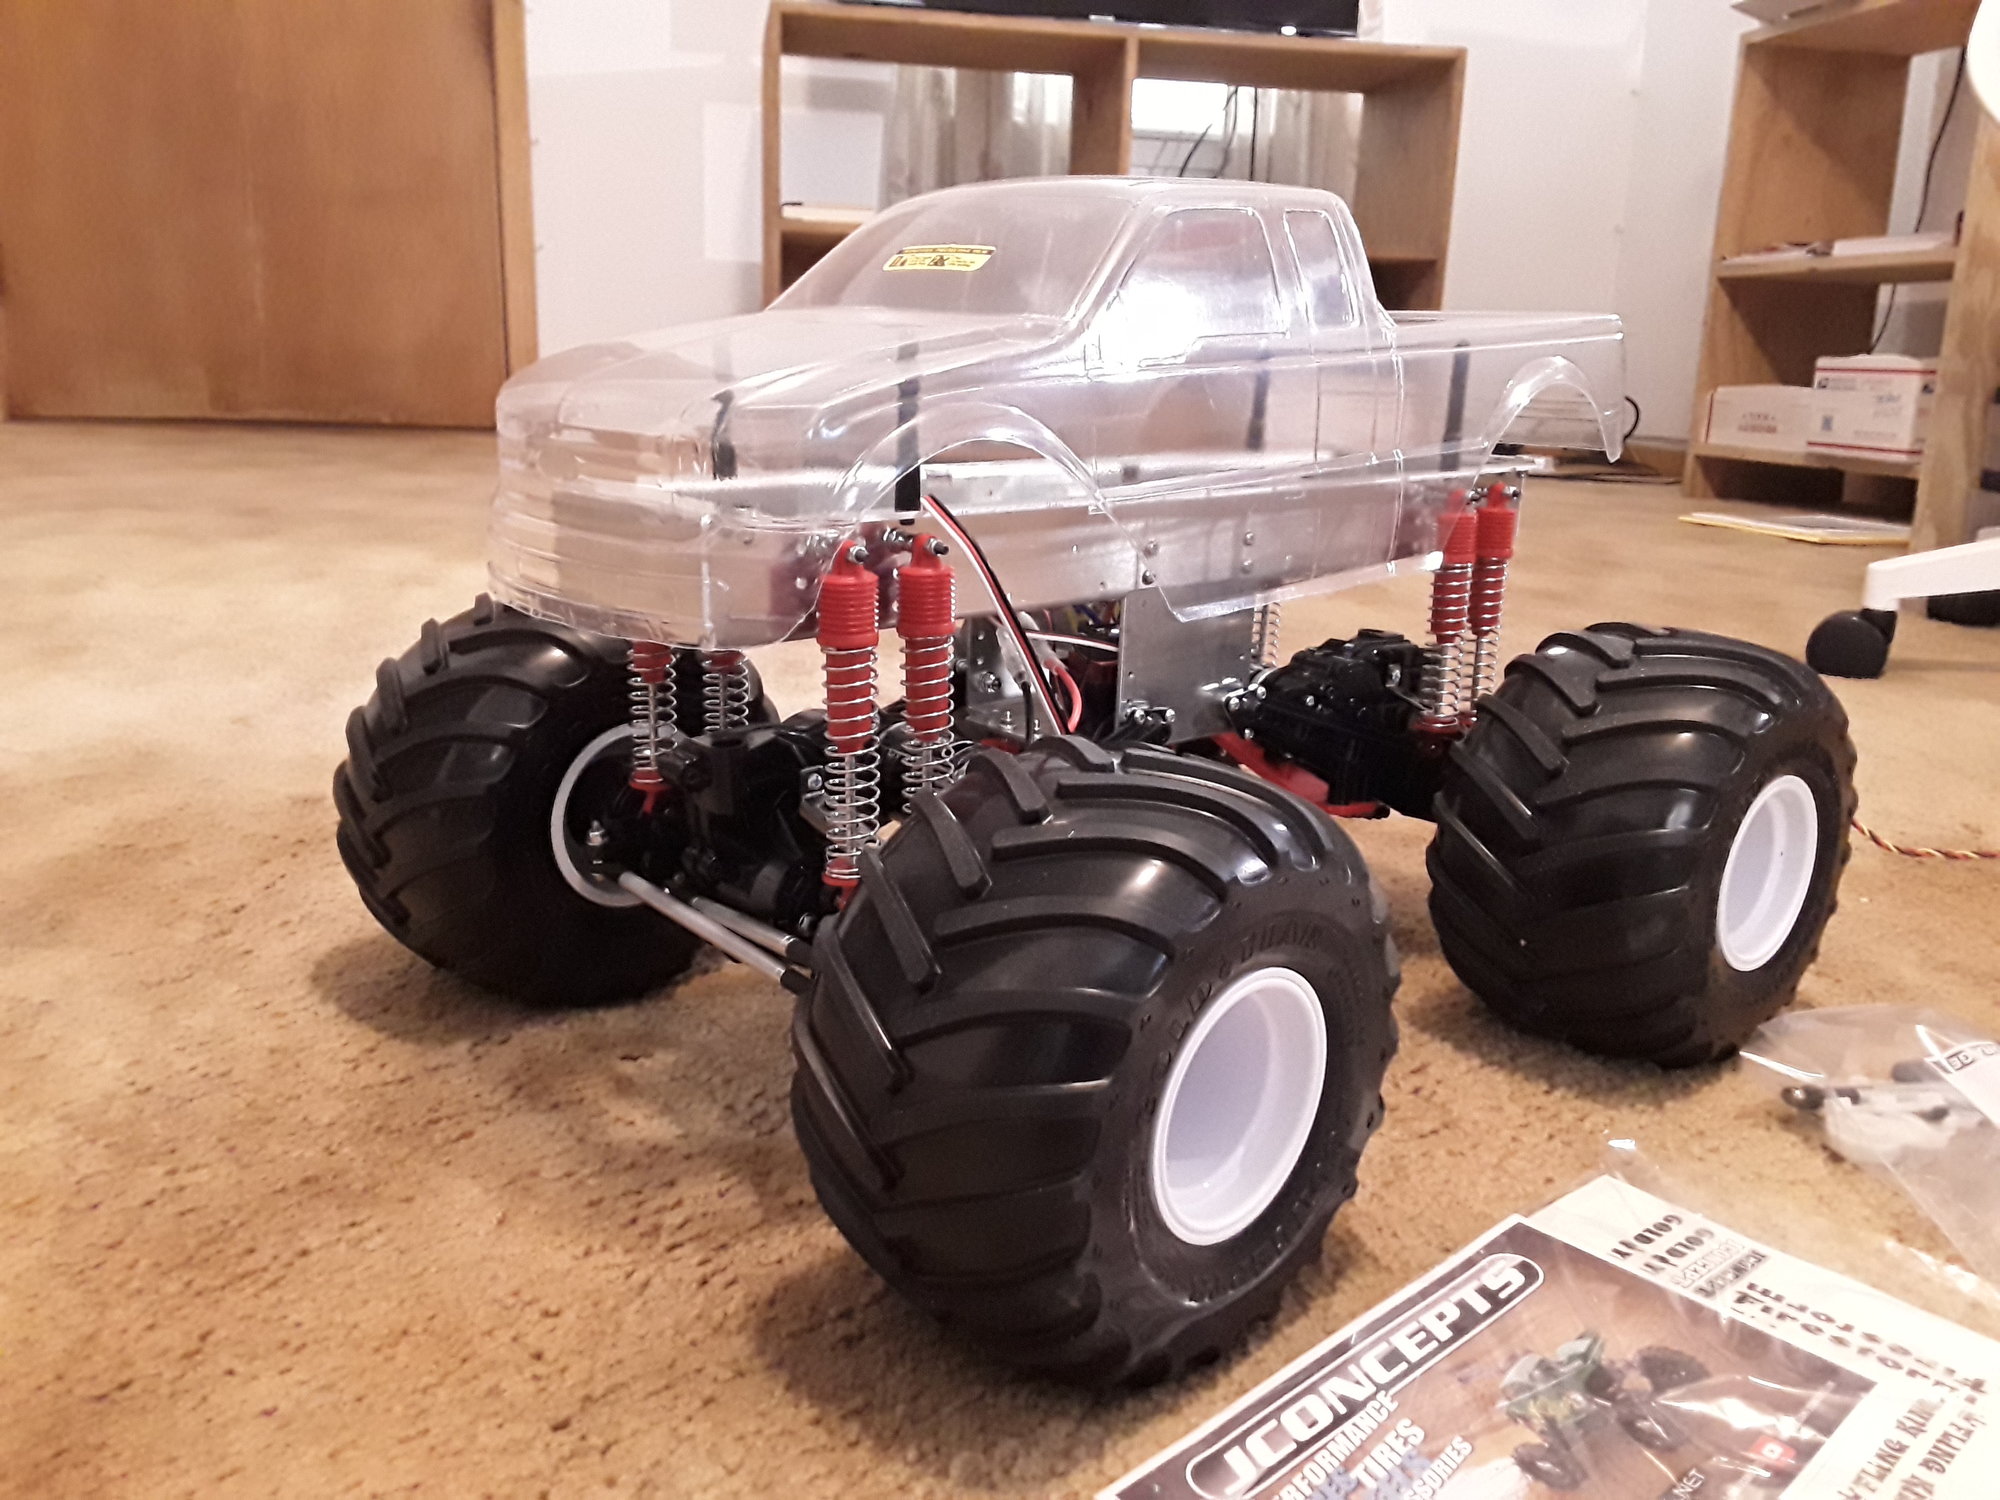 New clodbuster retro race truck build not finished all new - R/C Tech Forums